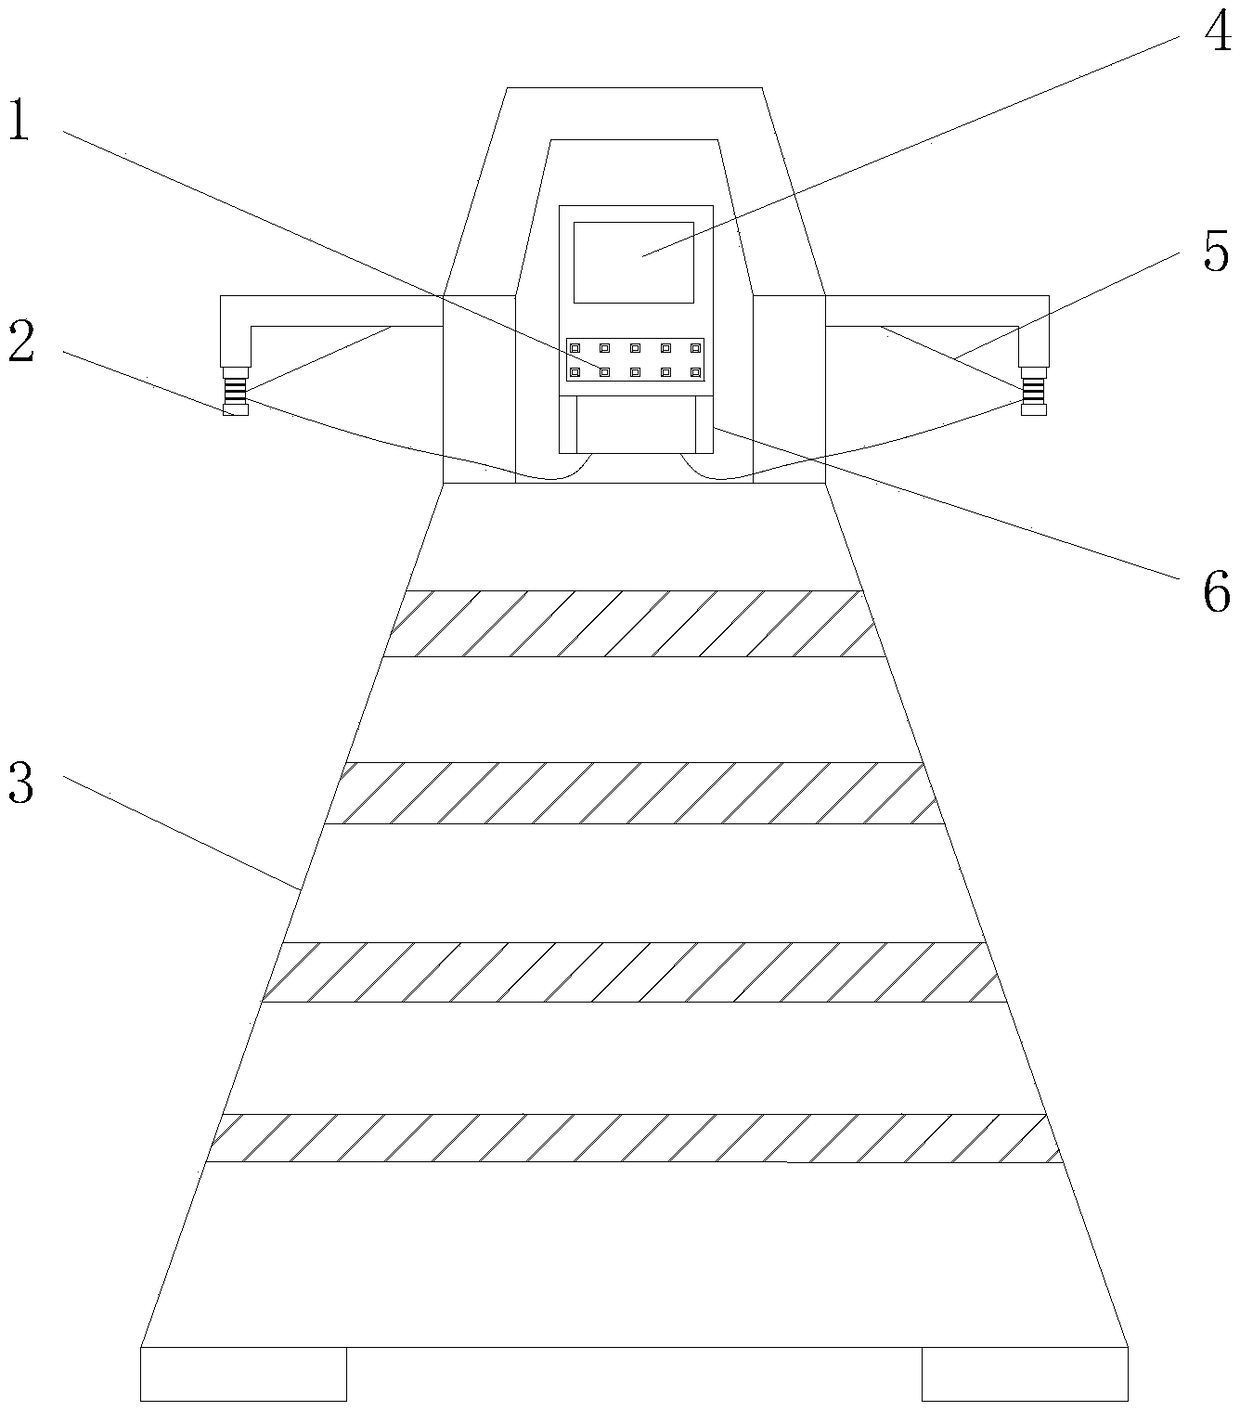 Fault detector for communication engineering overhead cable